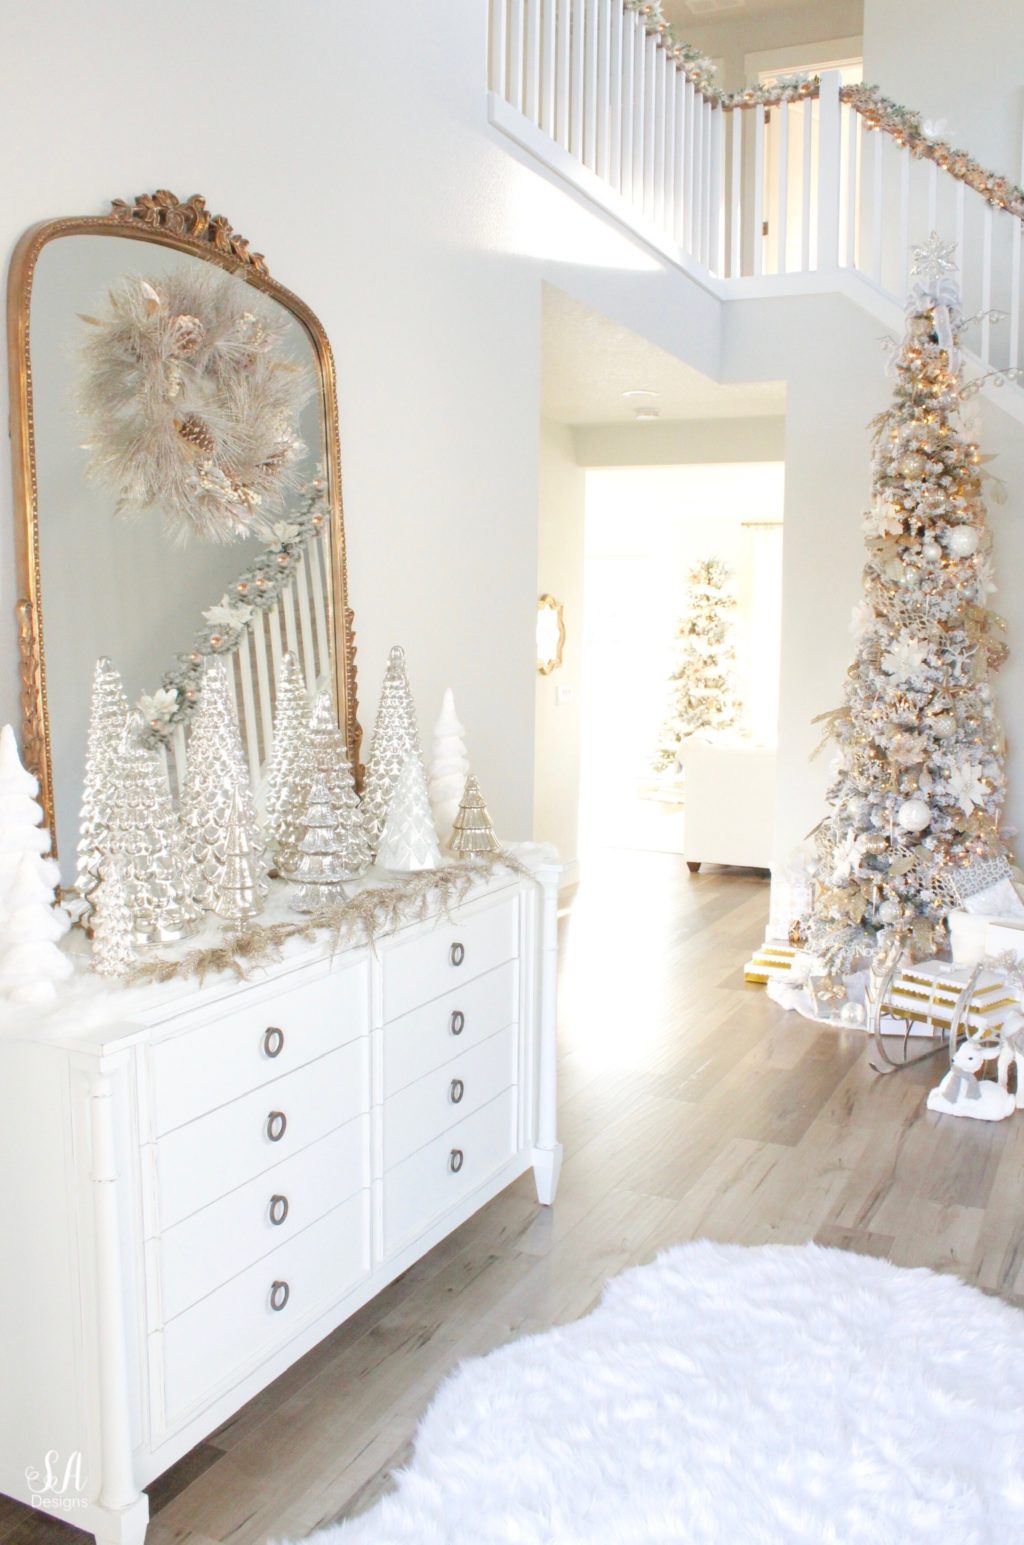 Whimsical Glam Christmas Living Room In Pastels - Summer Adams